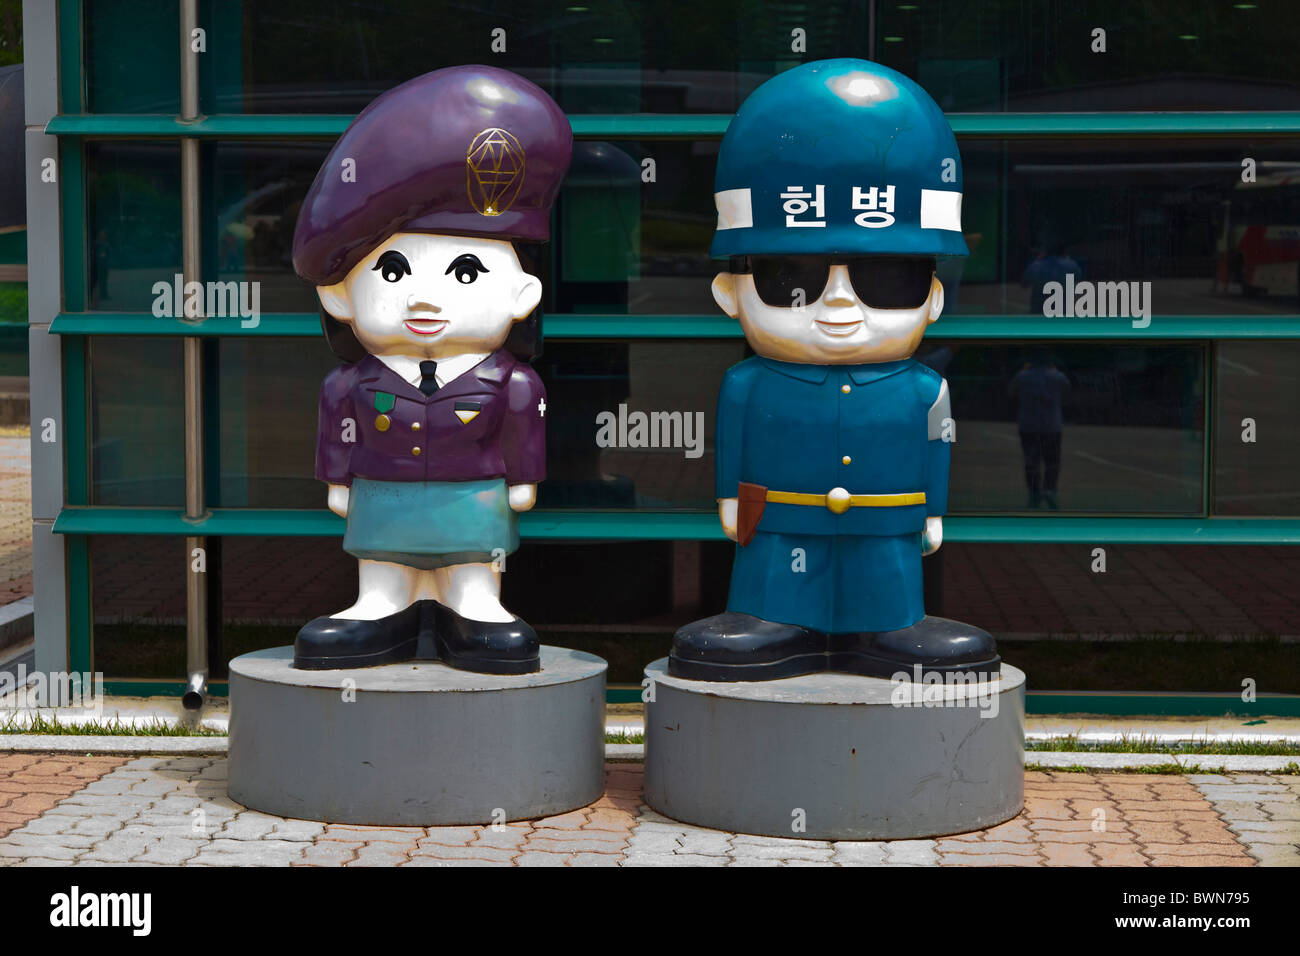 Cartoon Police Officer Soldier statue near entrance to Third Tunnel at DMZ Demilitarized Zone Panmunjeon South Korea. JMH3806 Stock Photo